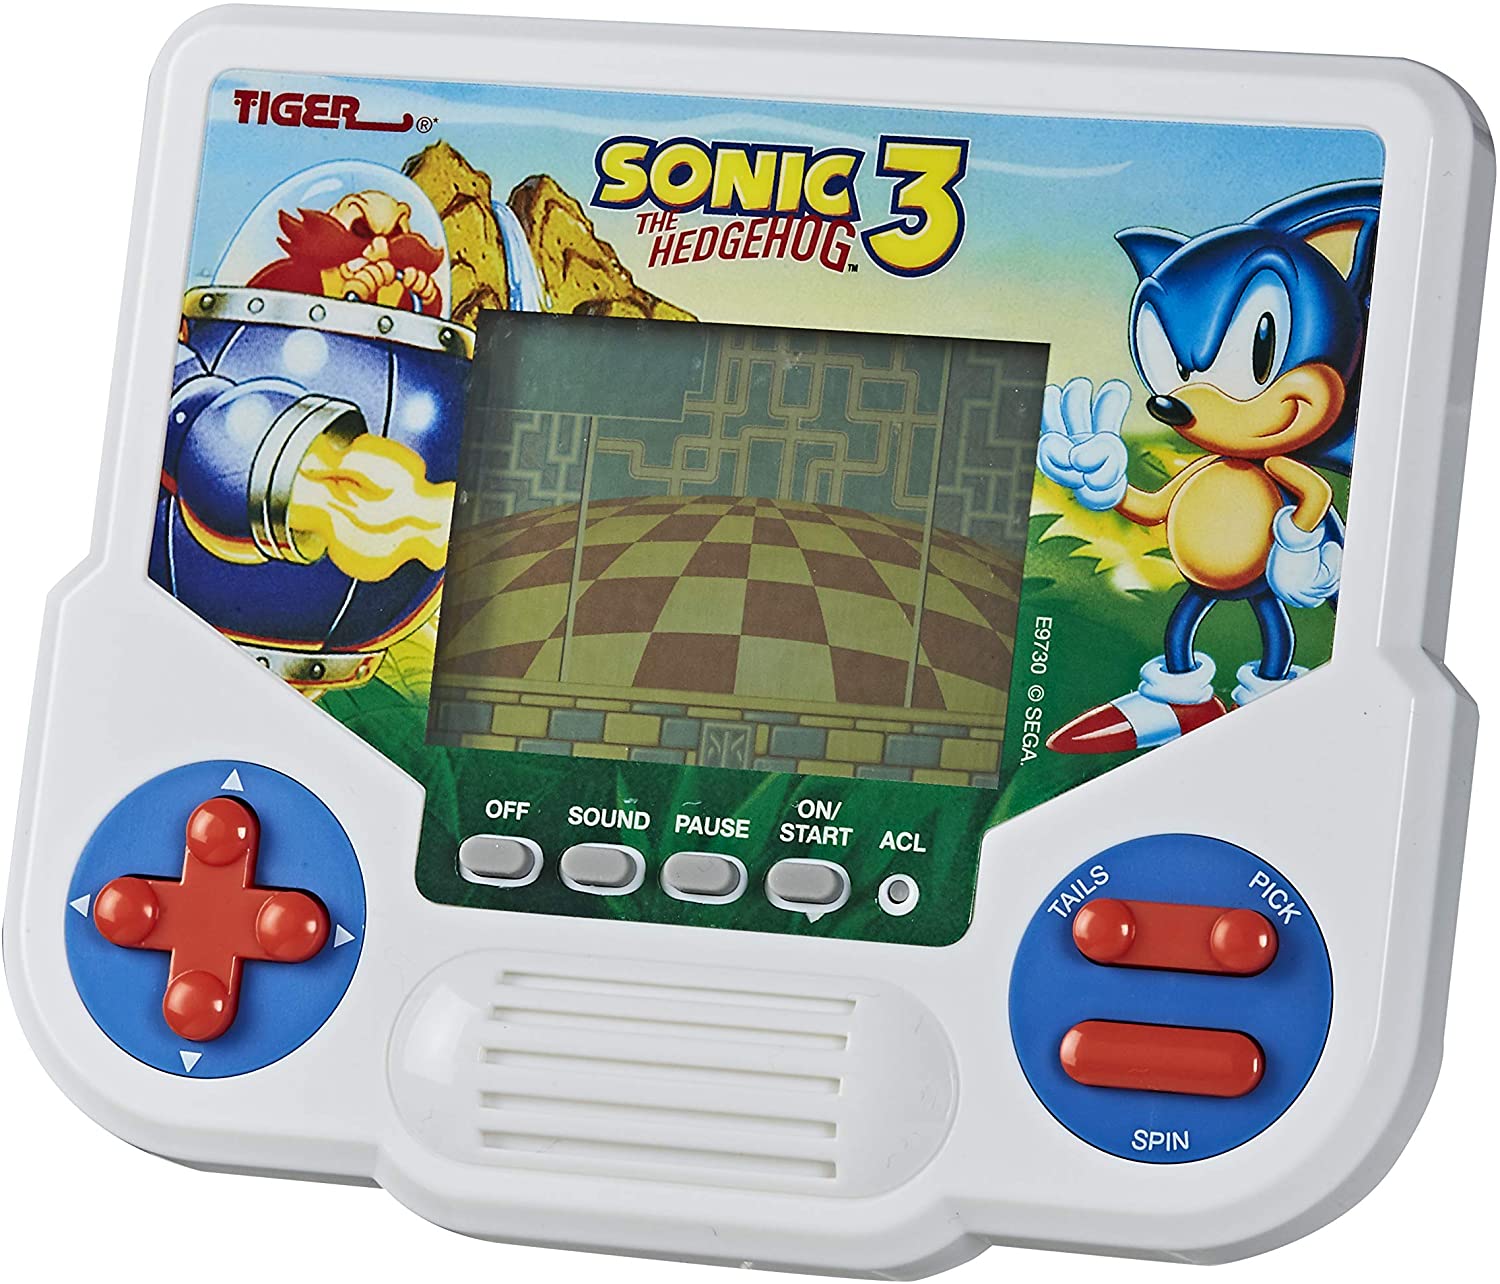  Games - Sonic the Hedgehog